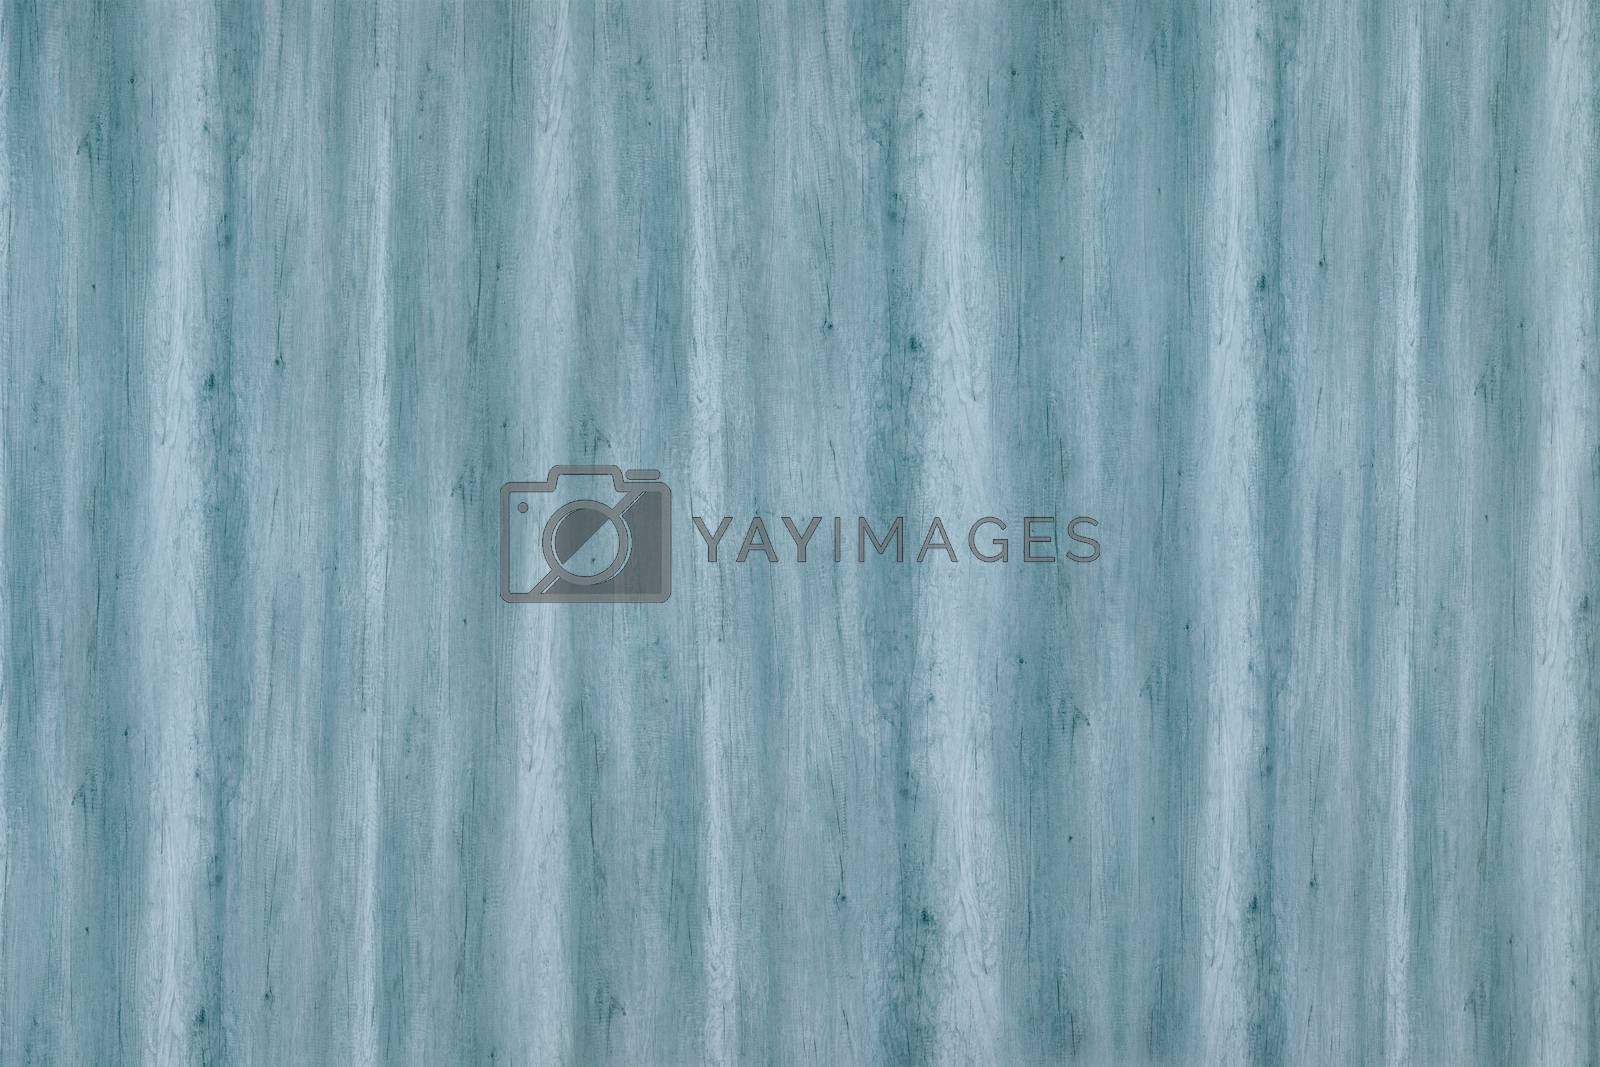 Royalty free image of Wood texture with natural patterns, blue wooden texture. by ivo_13